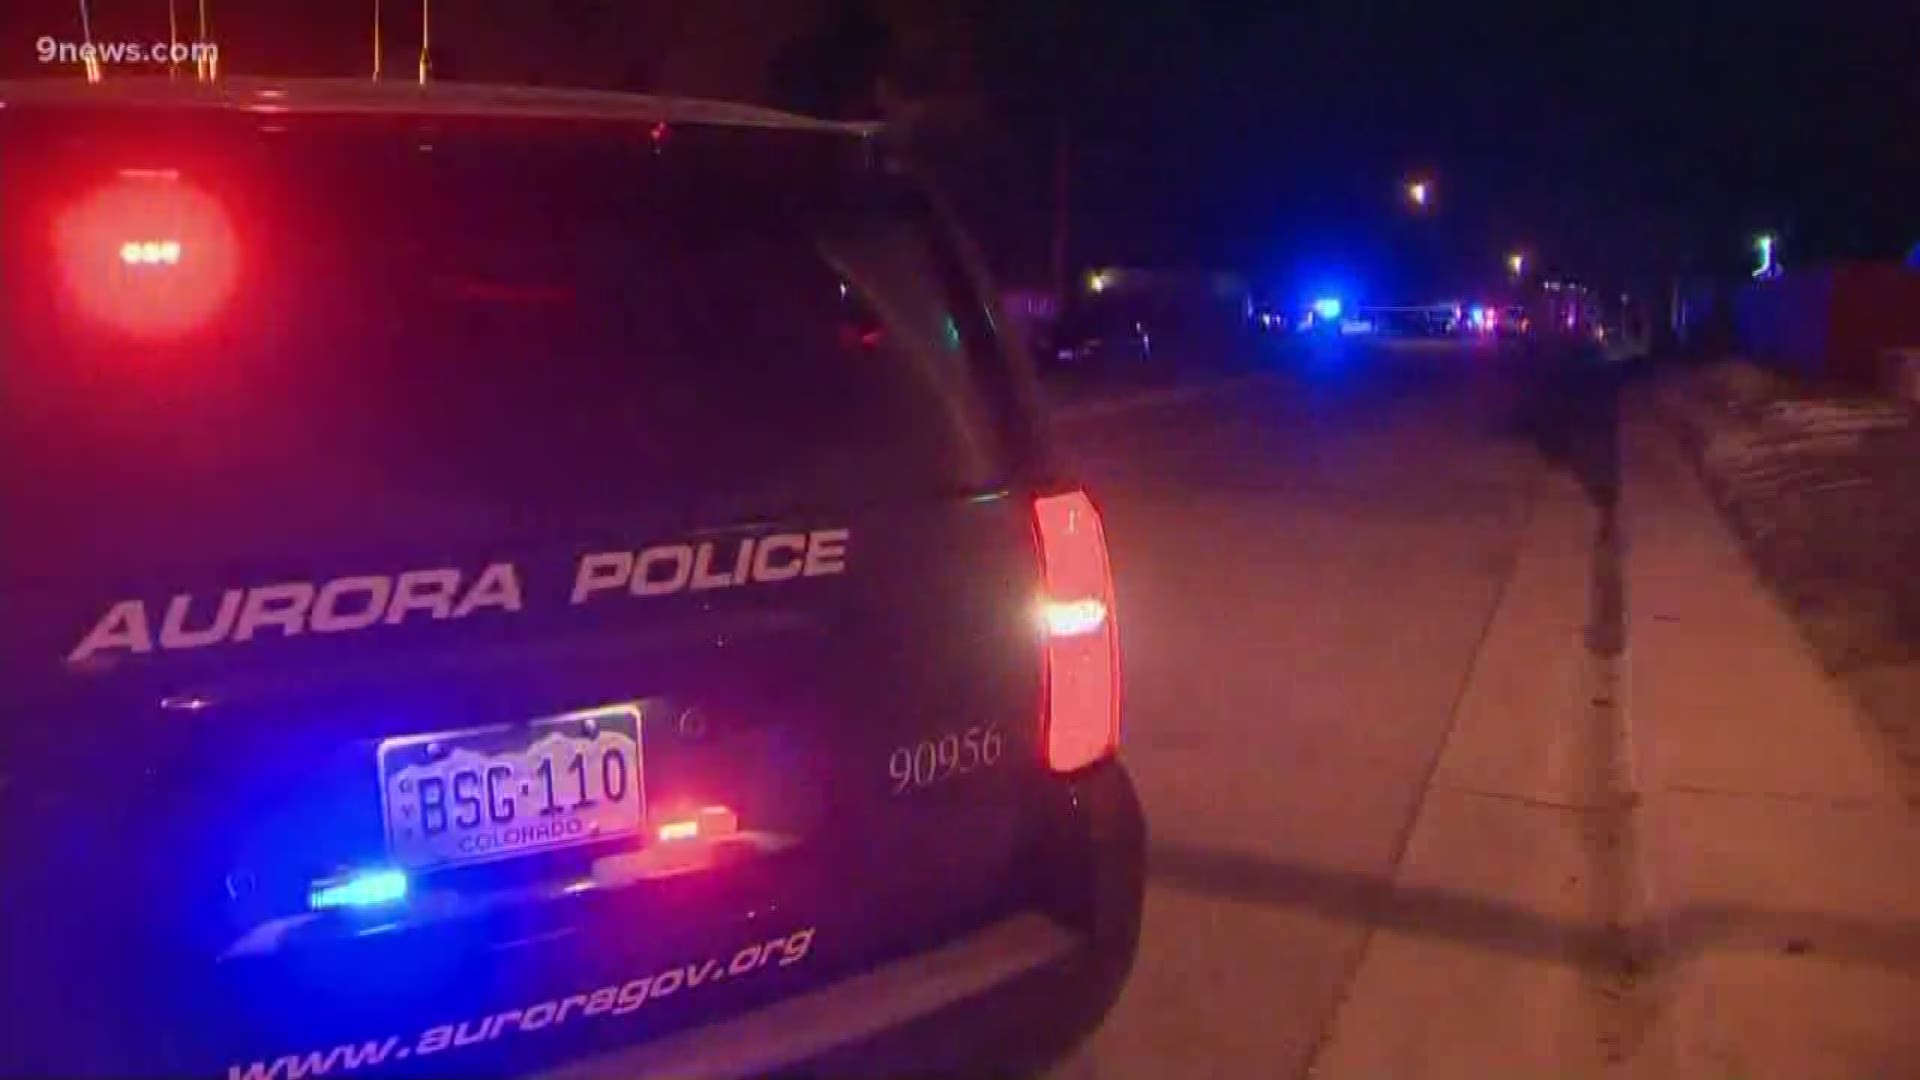 Officers in Aurora find one person shot early Friday morning.